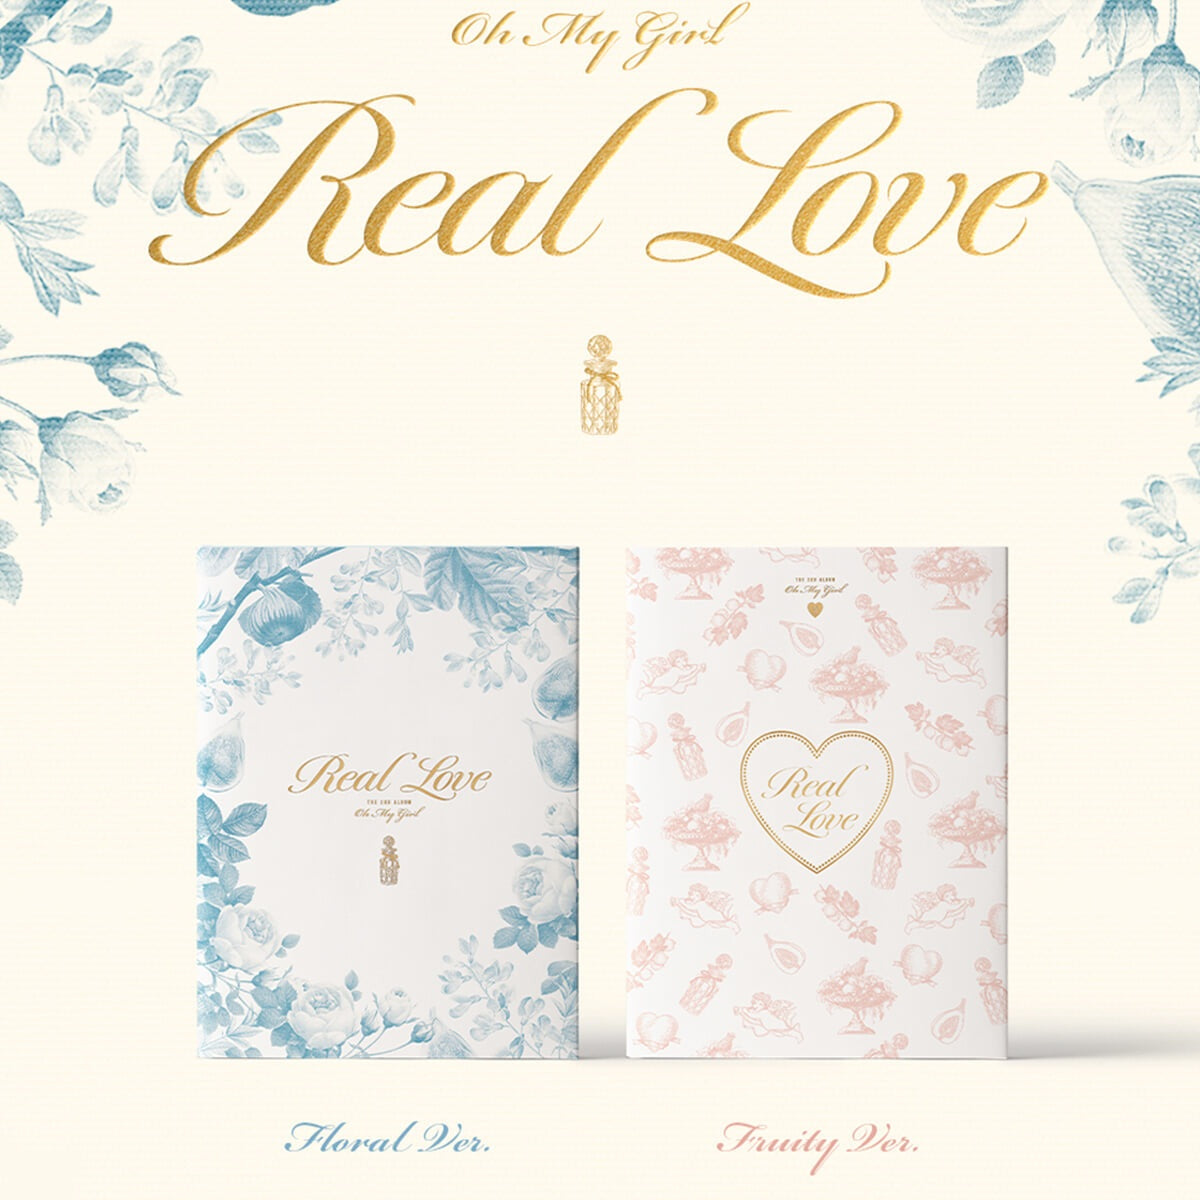 OH MY GIRL 2nd Album : Real Love